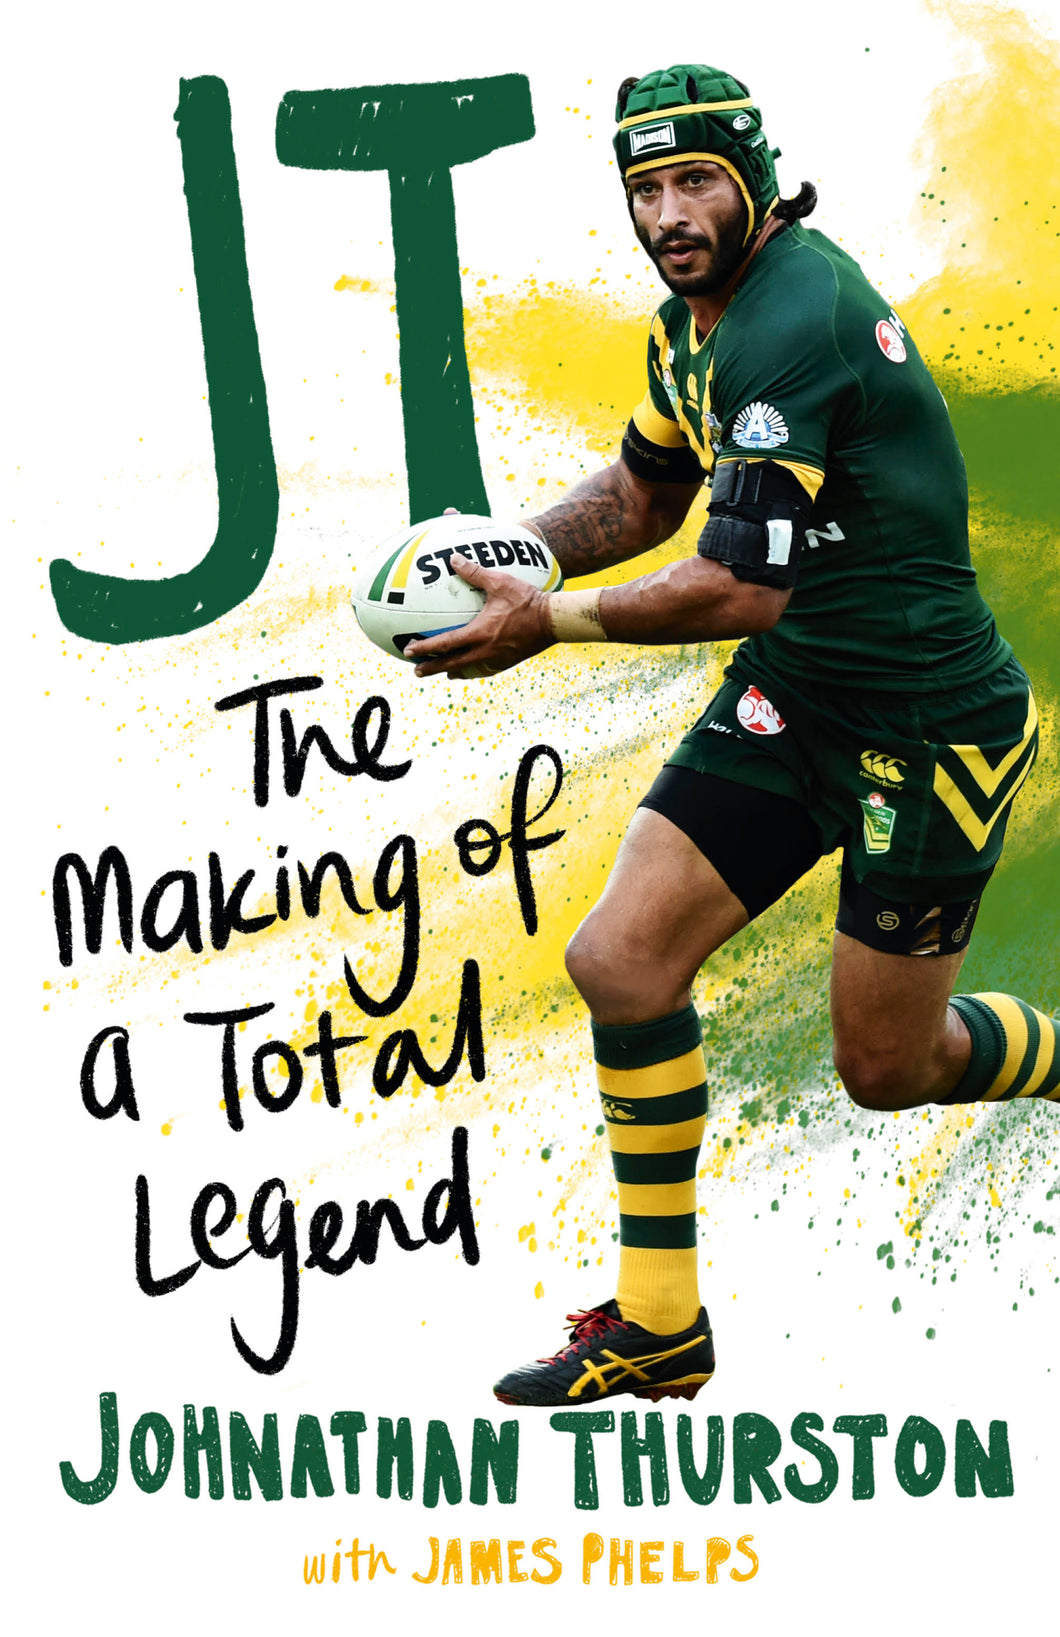 JT: The Making of A Total Legend by Johnathan Thurston and James Phelps